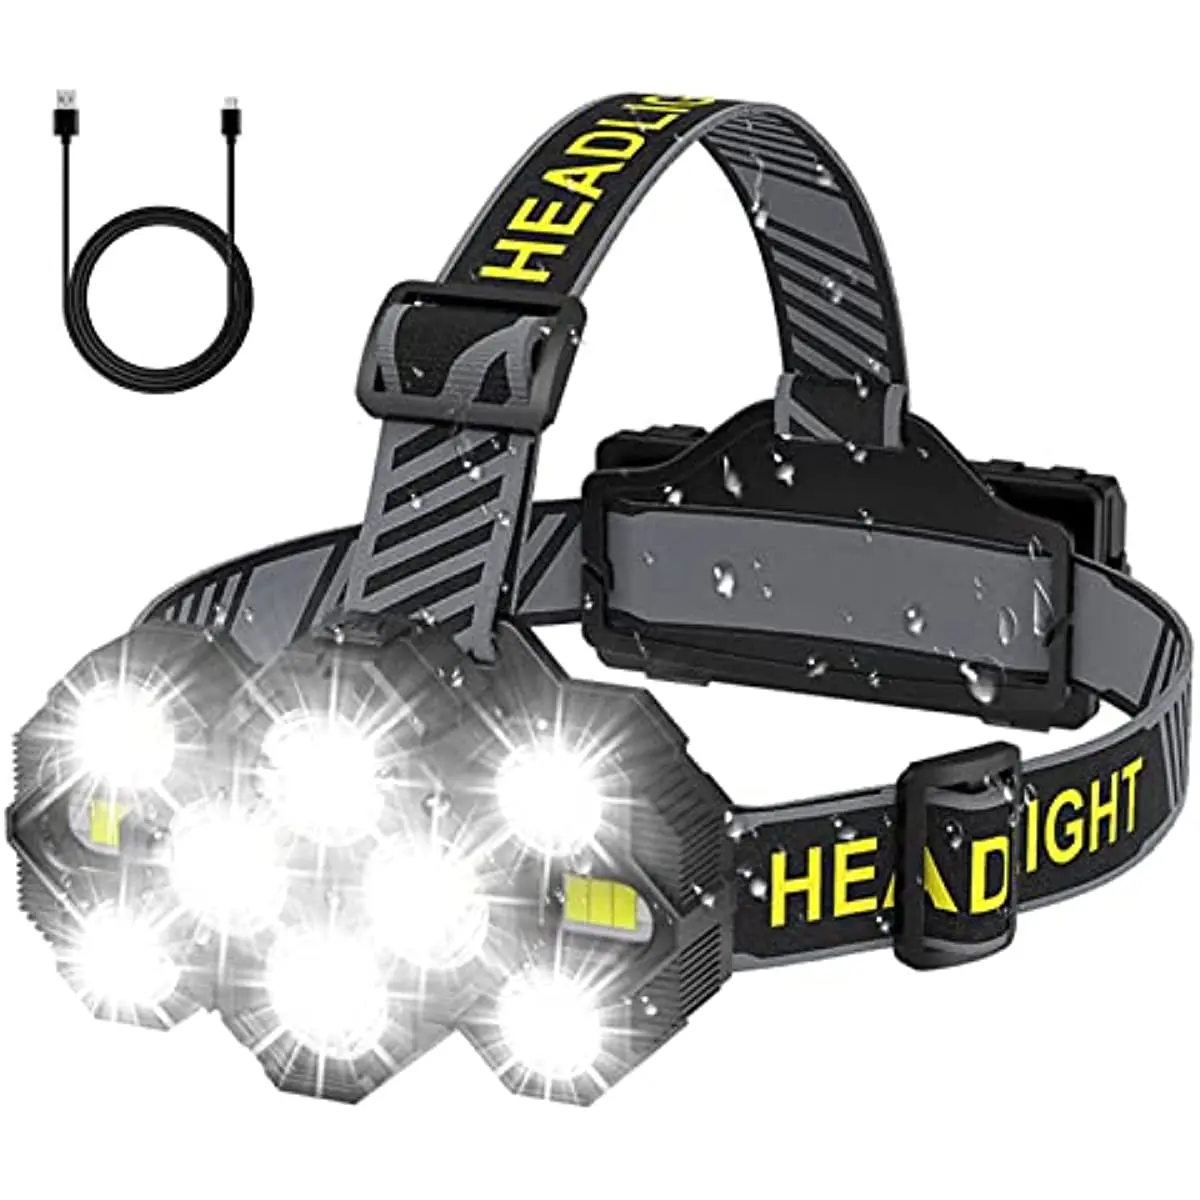 10 LED USB Rechargeable High Power 22000 Lumen Super Bright Head Lamp Powerful Waterproof Head Light with Red Light Fishlight